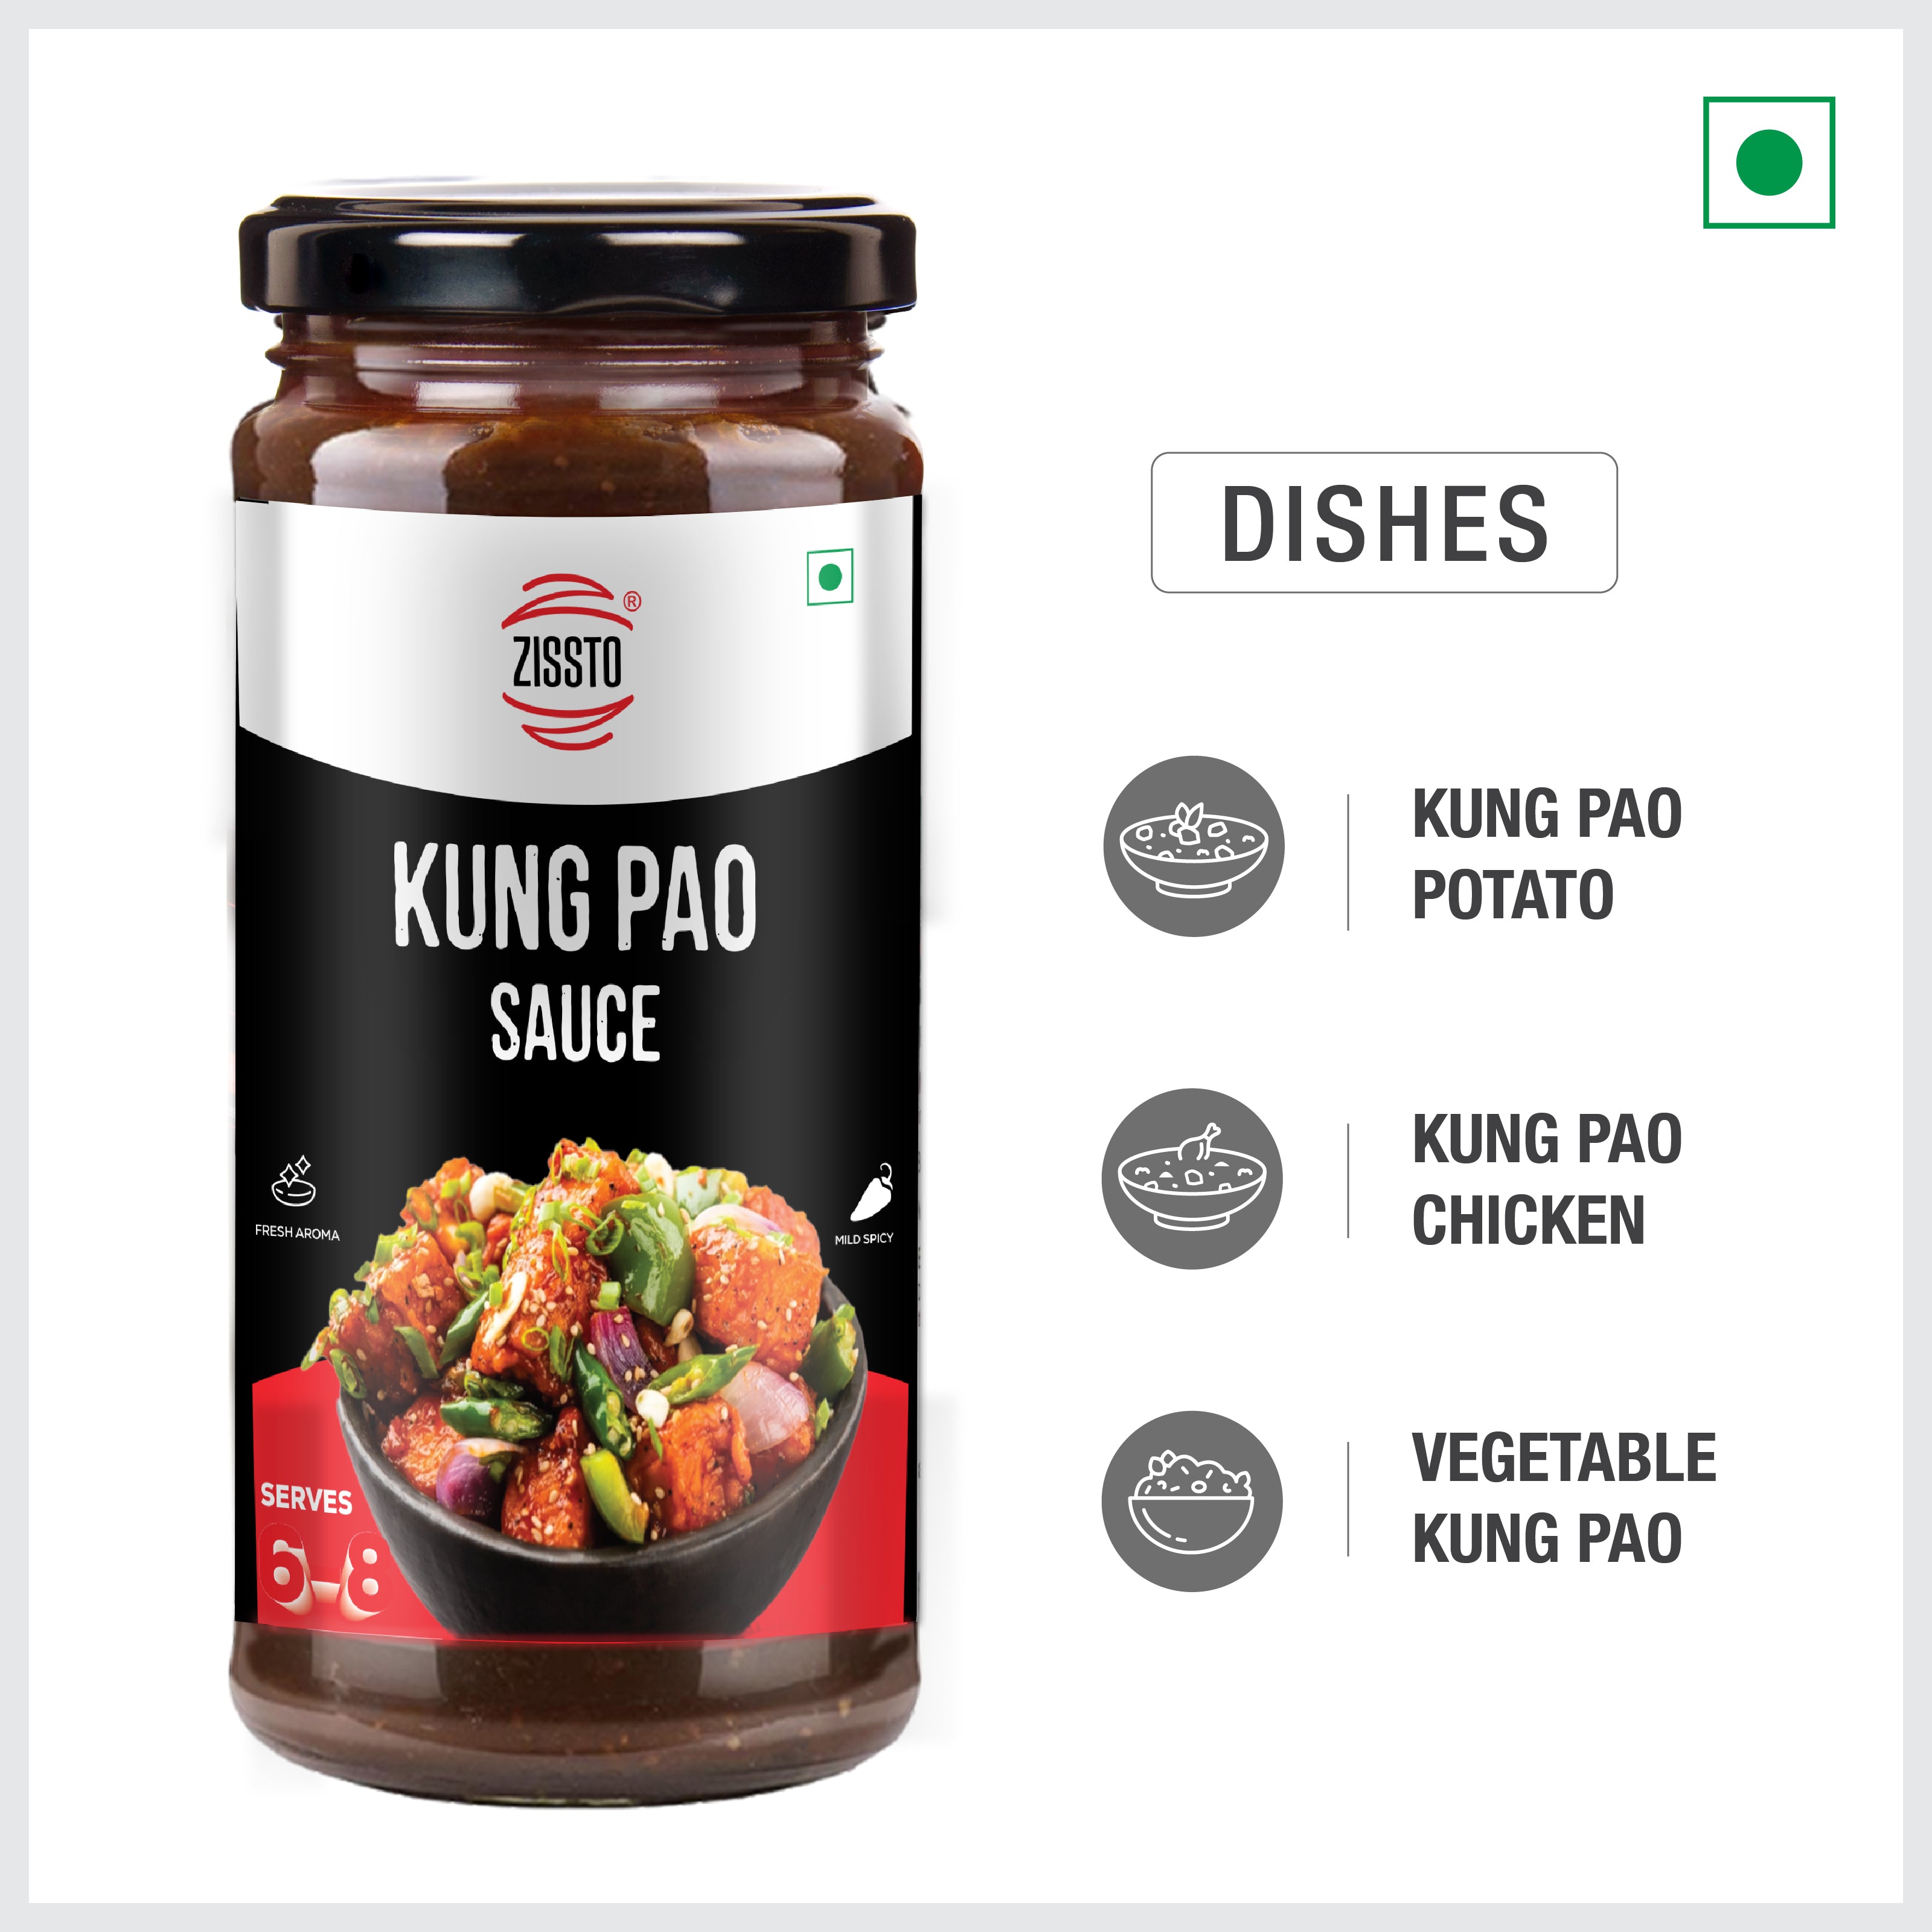 Zissto Kung Pao Cooking Gravy - 250gms (Serves 6-8)